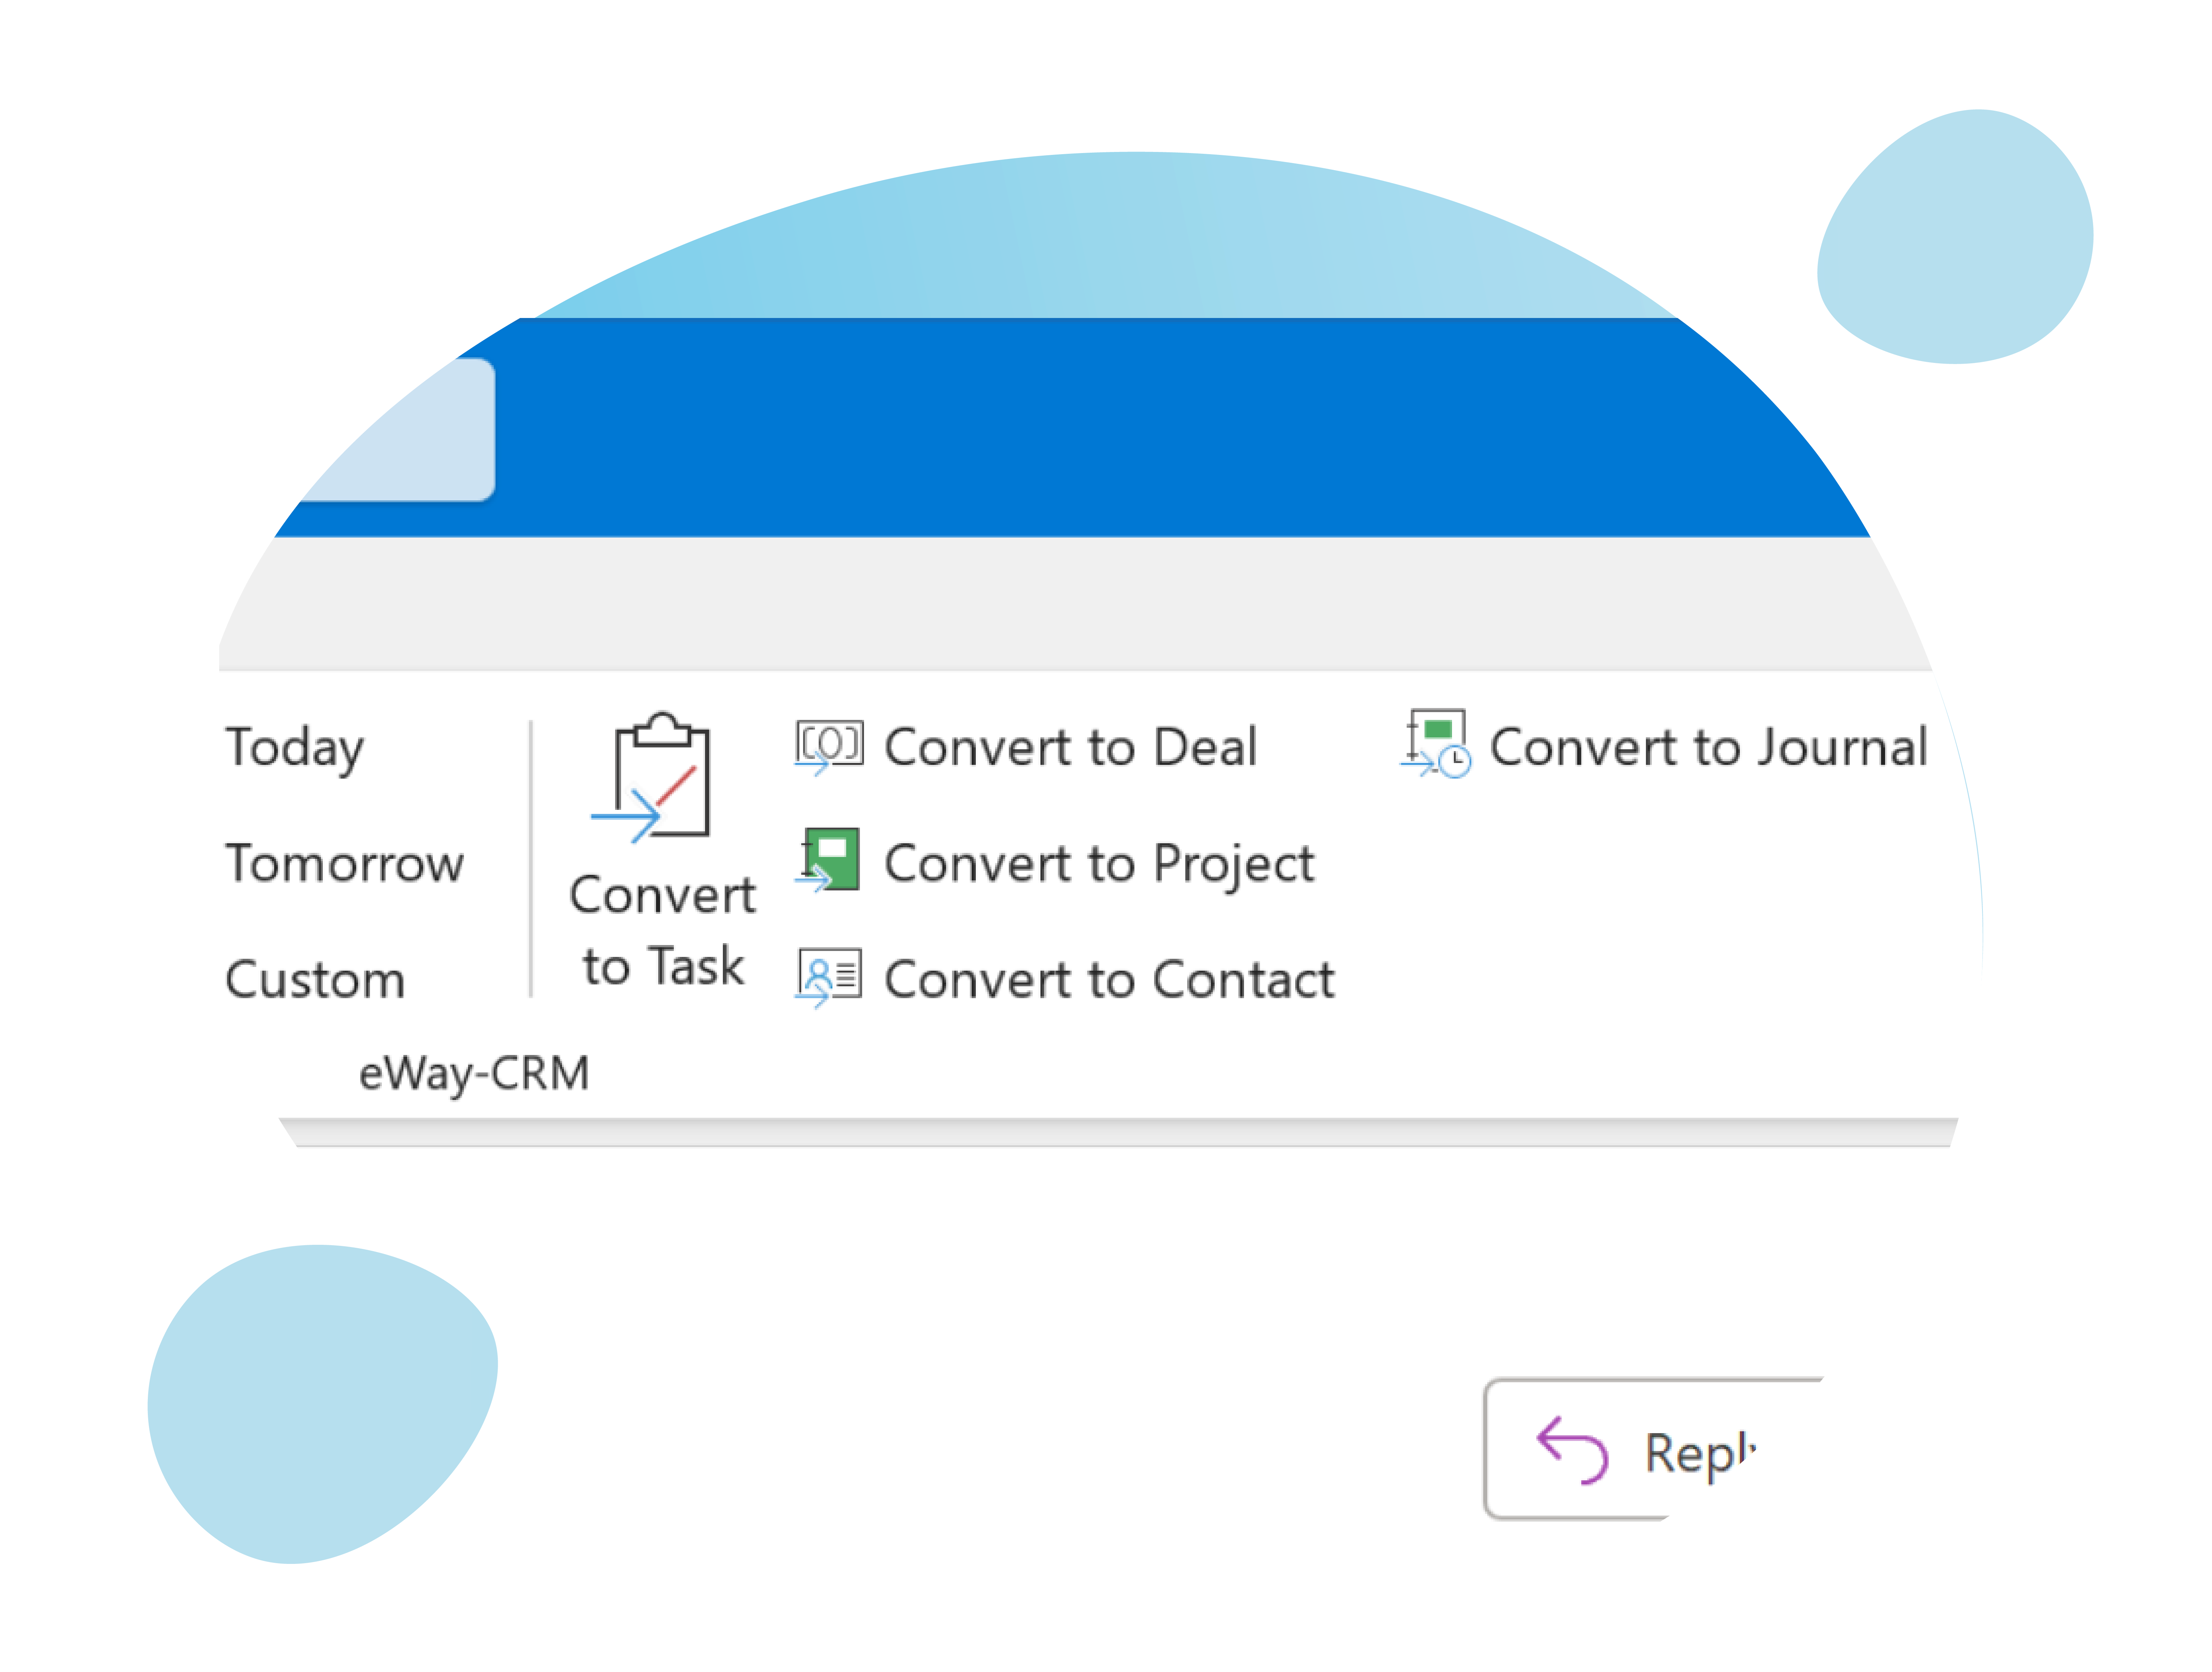 eWay-CRM Software - Save time with our "Convert to" feature. Turn an email to a contact, deal, task, or project in a single click.